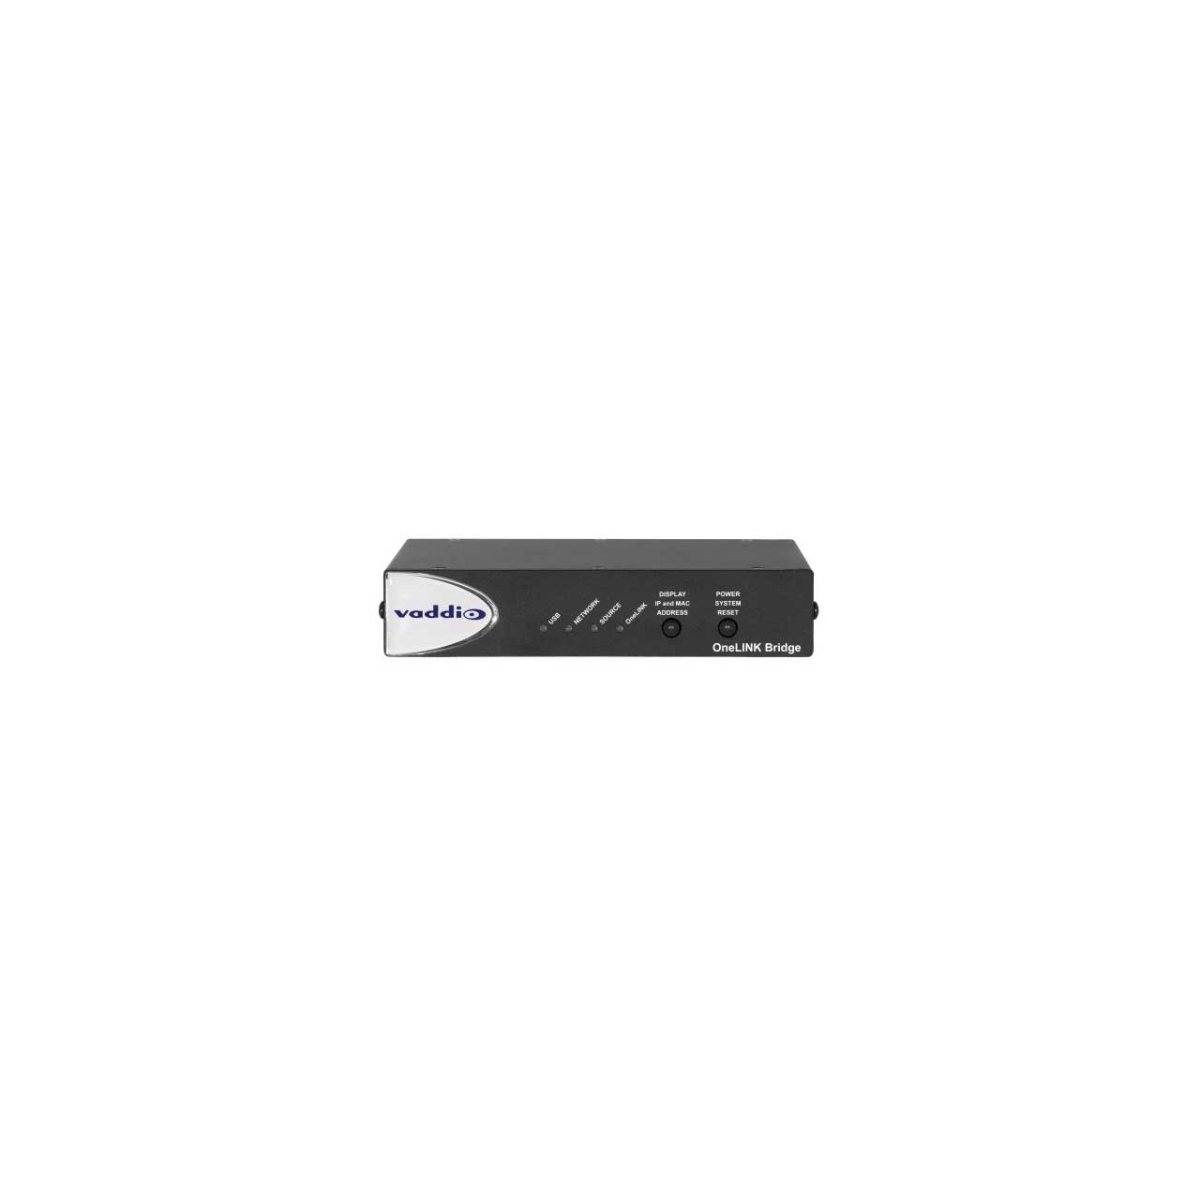 Picture of Vaddio VAD-999-9630-000 OneLINK Bridge AV Interface for Sony SRG & Panasonic HE Cameras with HDMI HDBaseT Technology